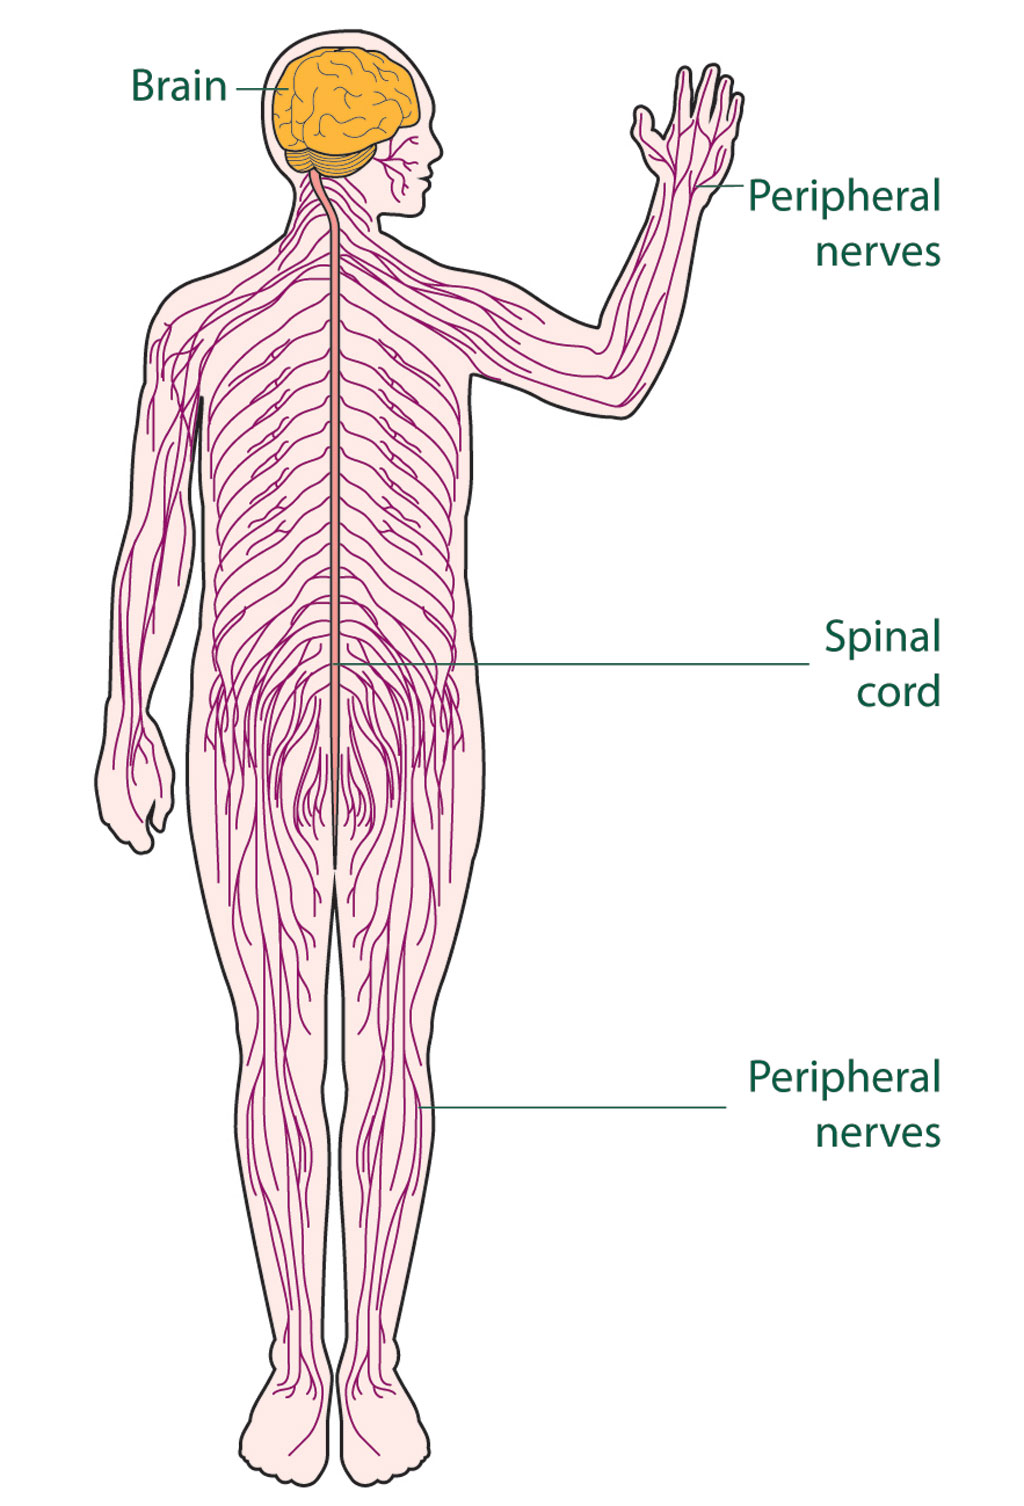 Central Nervous System Drawing at GetDrawings Free download